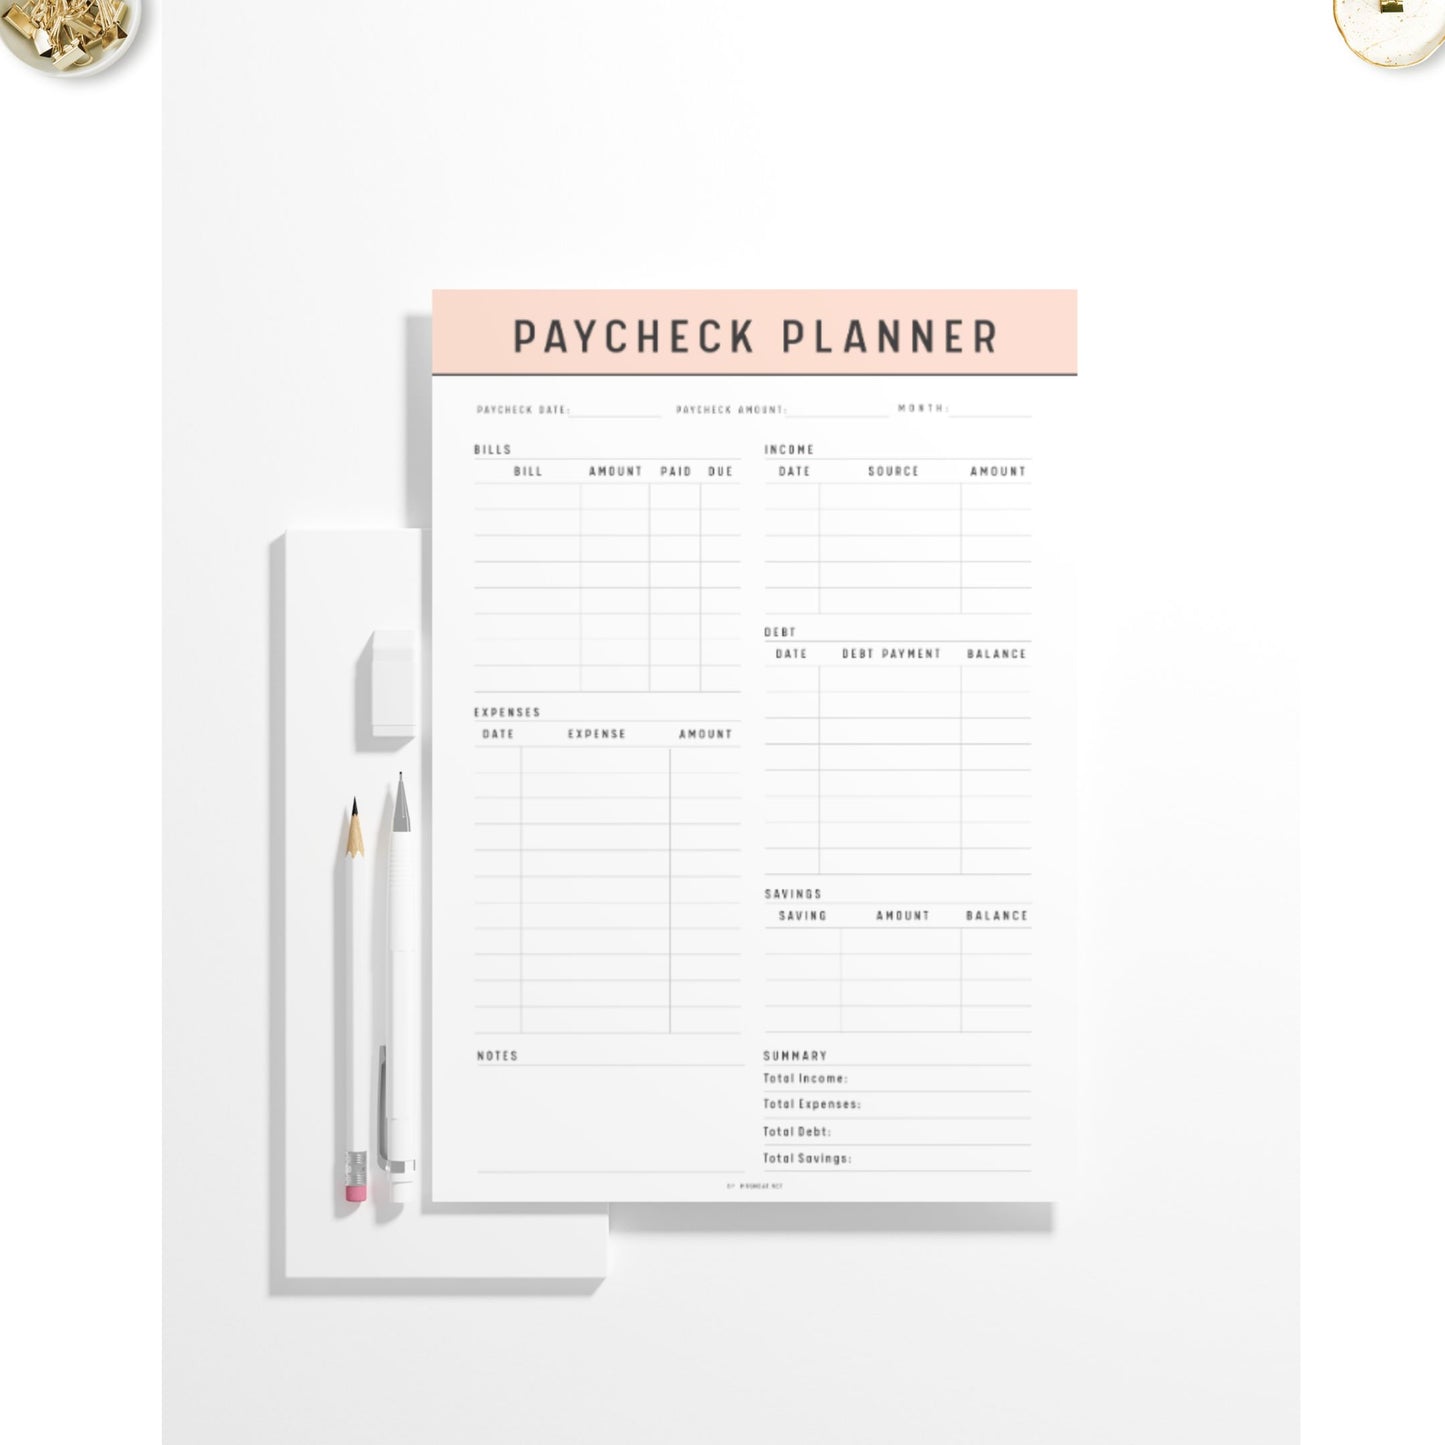 Paycheck Budget Template Printable, A4, A5, Letter, Half Letter, 5 color options included, Green, Peach, Blue, Pink, Minimalist Budget Planner Template, Digital Planner